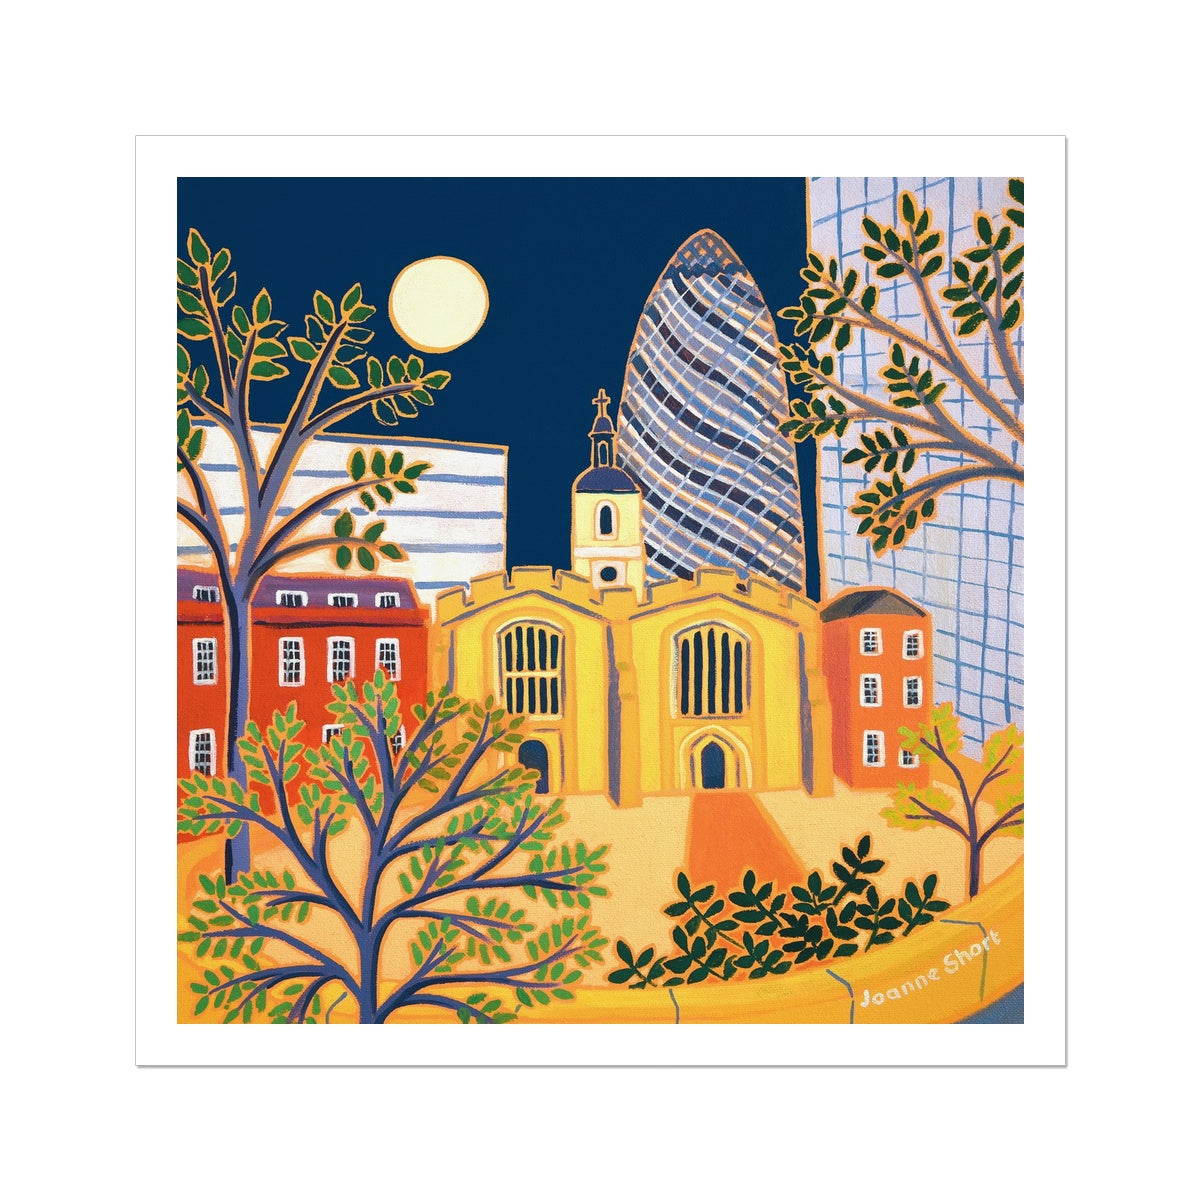 Joanne Short Fine Art Open Edition London Art Print &#39;The Old and the New, St Helen&#39;s Bishopsgate Church &amp; The Gherkin London&#39;.